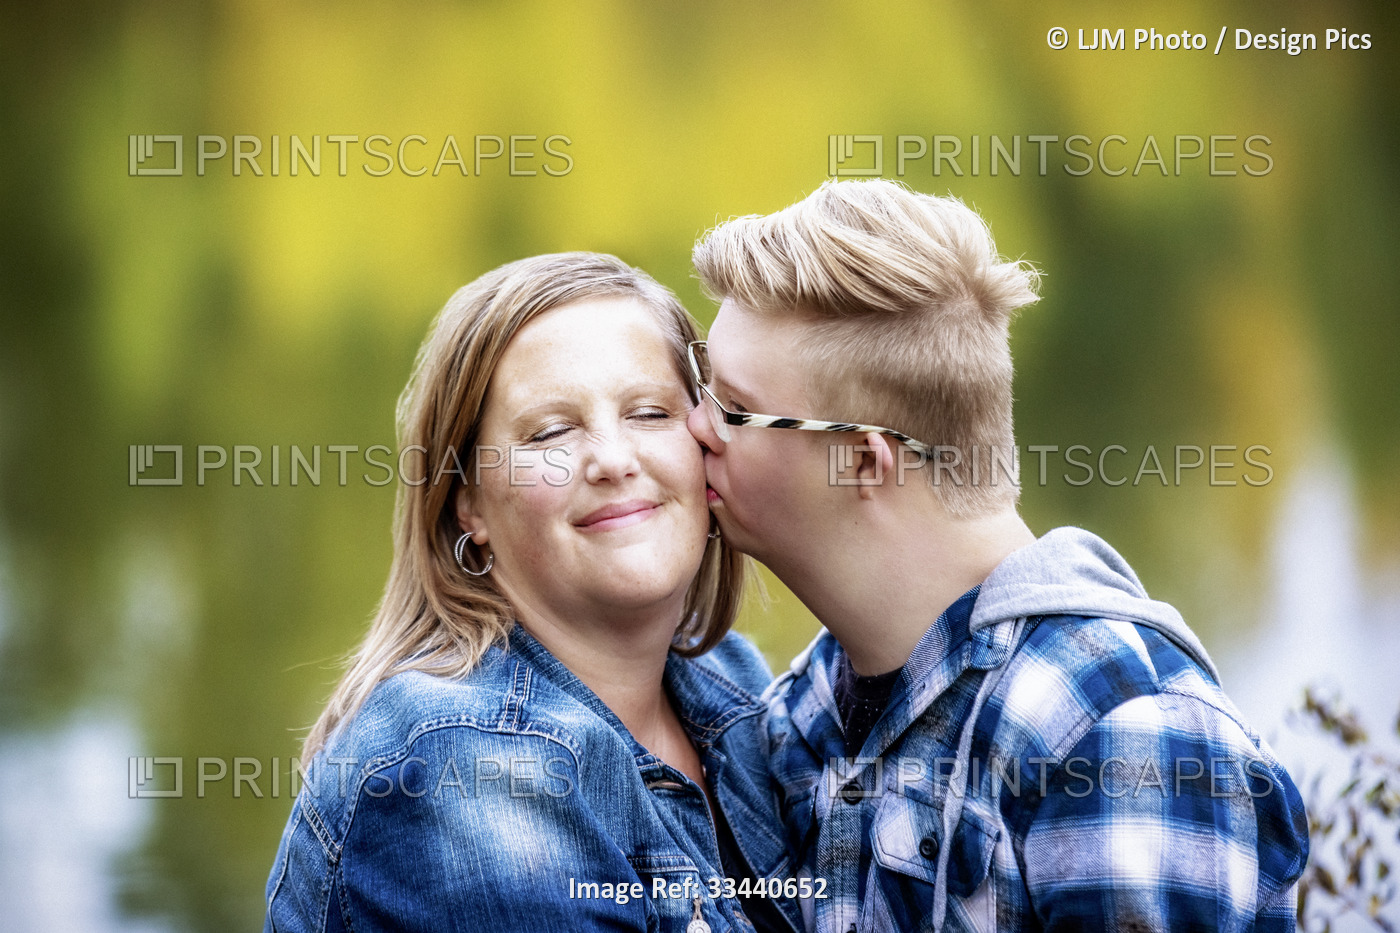 A mother and her son who has Down Syndrome spending quality time together in a ...